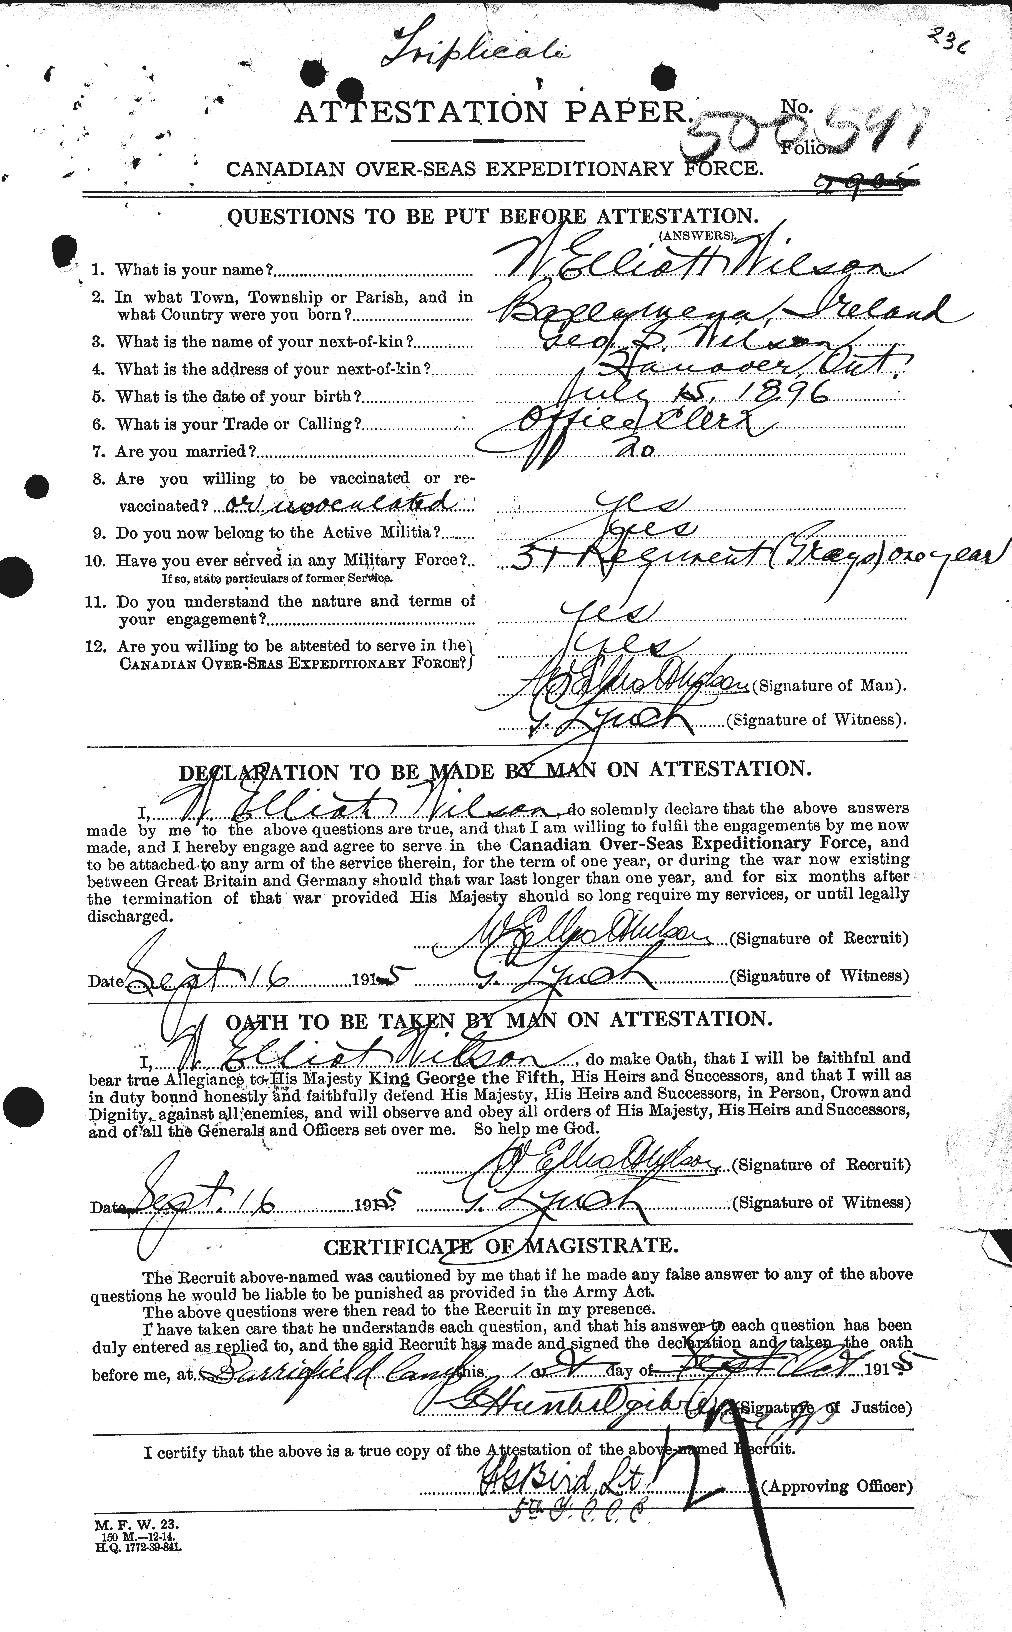 Personnel Records of the First World War - CEF 681980a